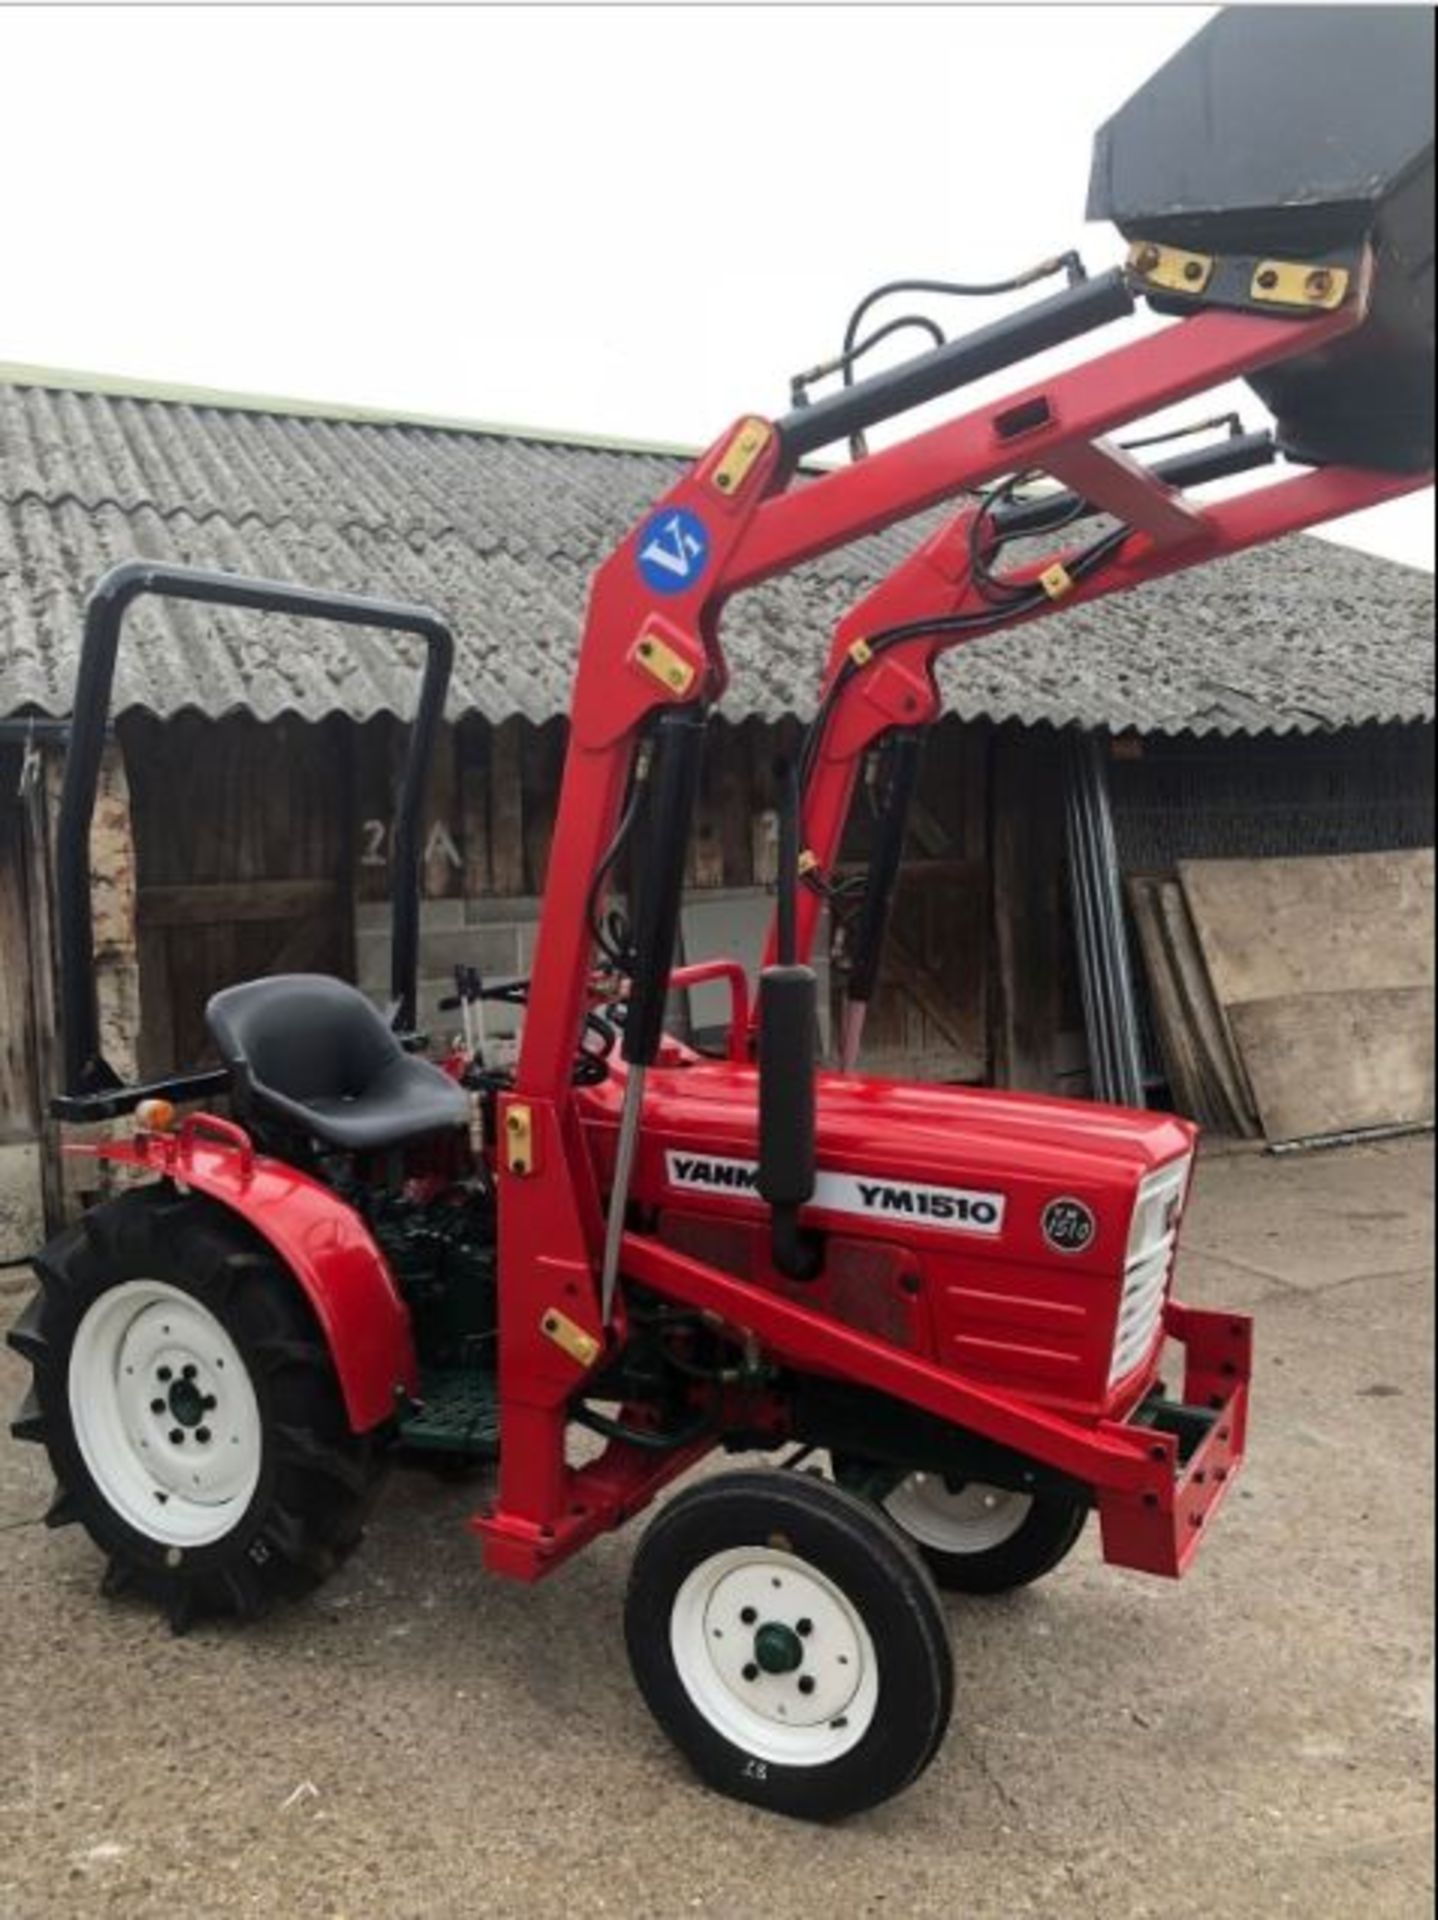 COMPACT TRACTOR YANMAR YM1510 C/W FRONT LOADER, REAR STANDARD PTO, 3 POINT LINKAGE TOP LINK ROLL BAR - Image 2 of 7